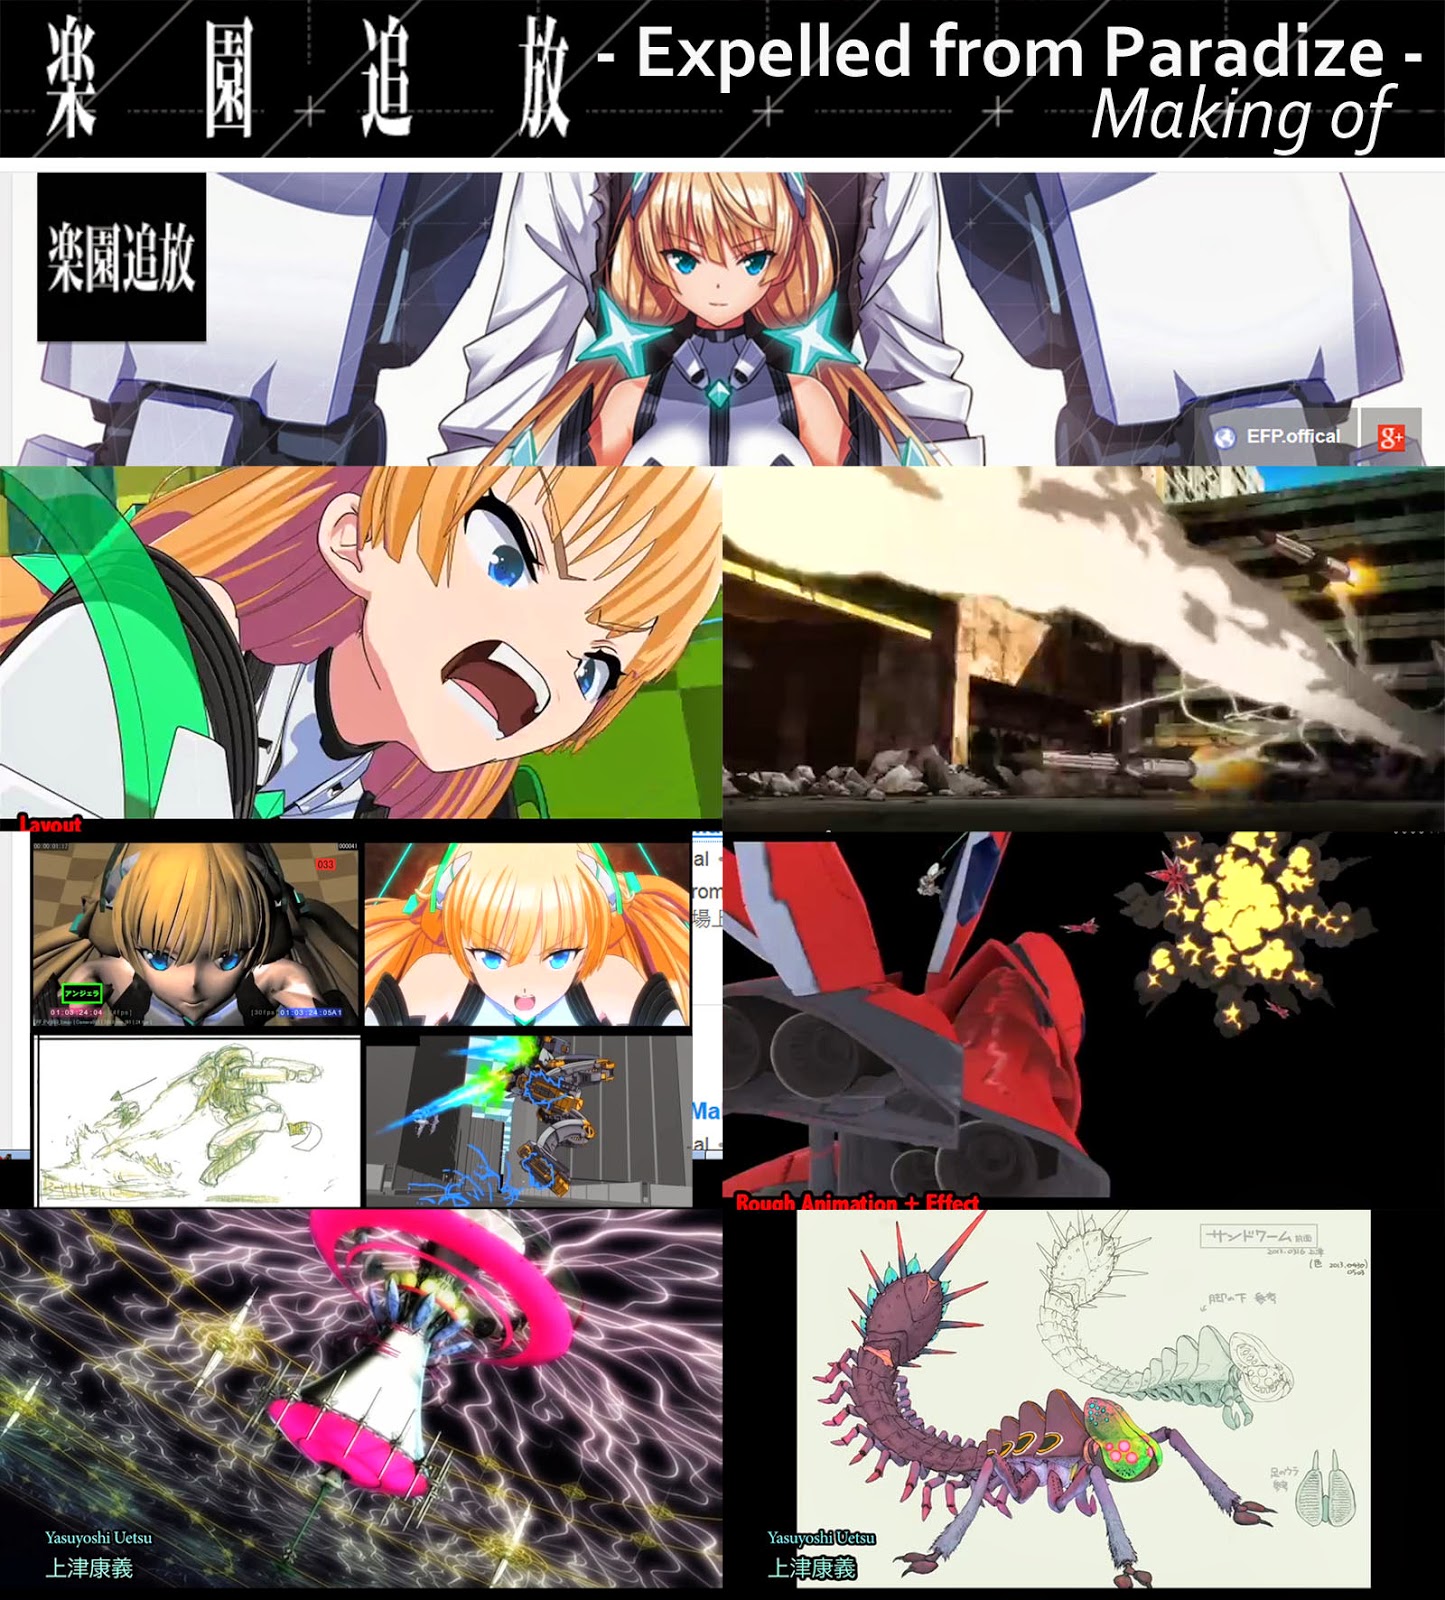 Animation Tutorials Collection:  Japanese Anime - Expelled From  Paradise 楽園追放- Making of